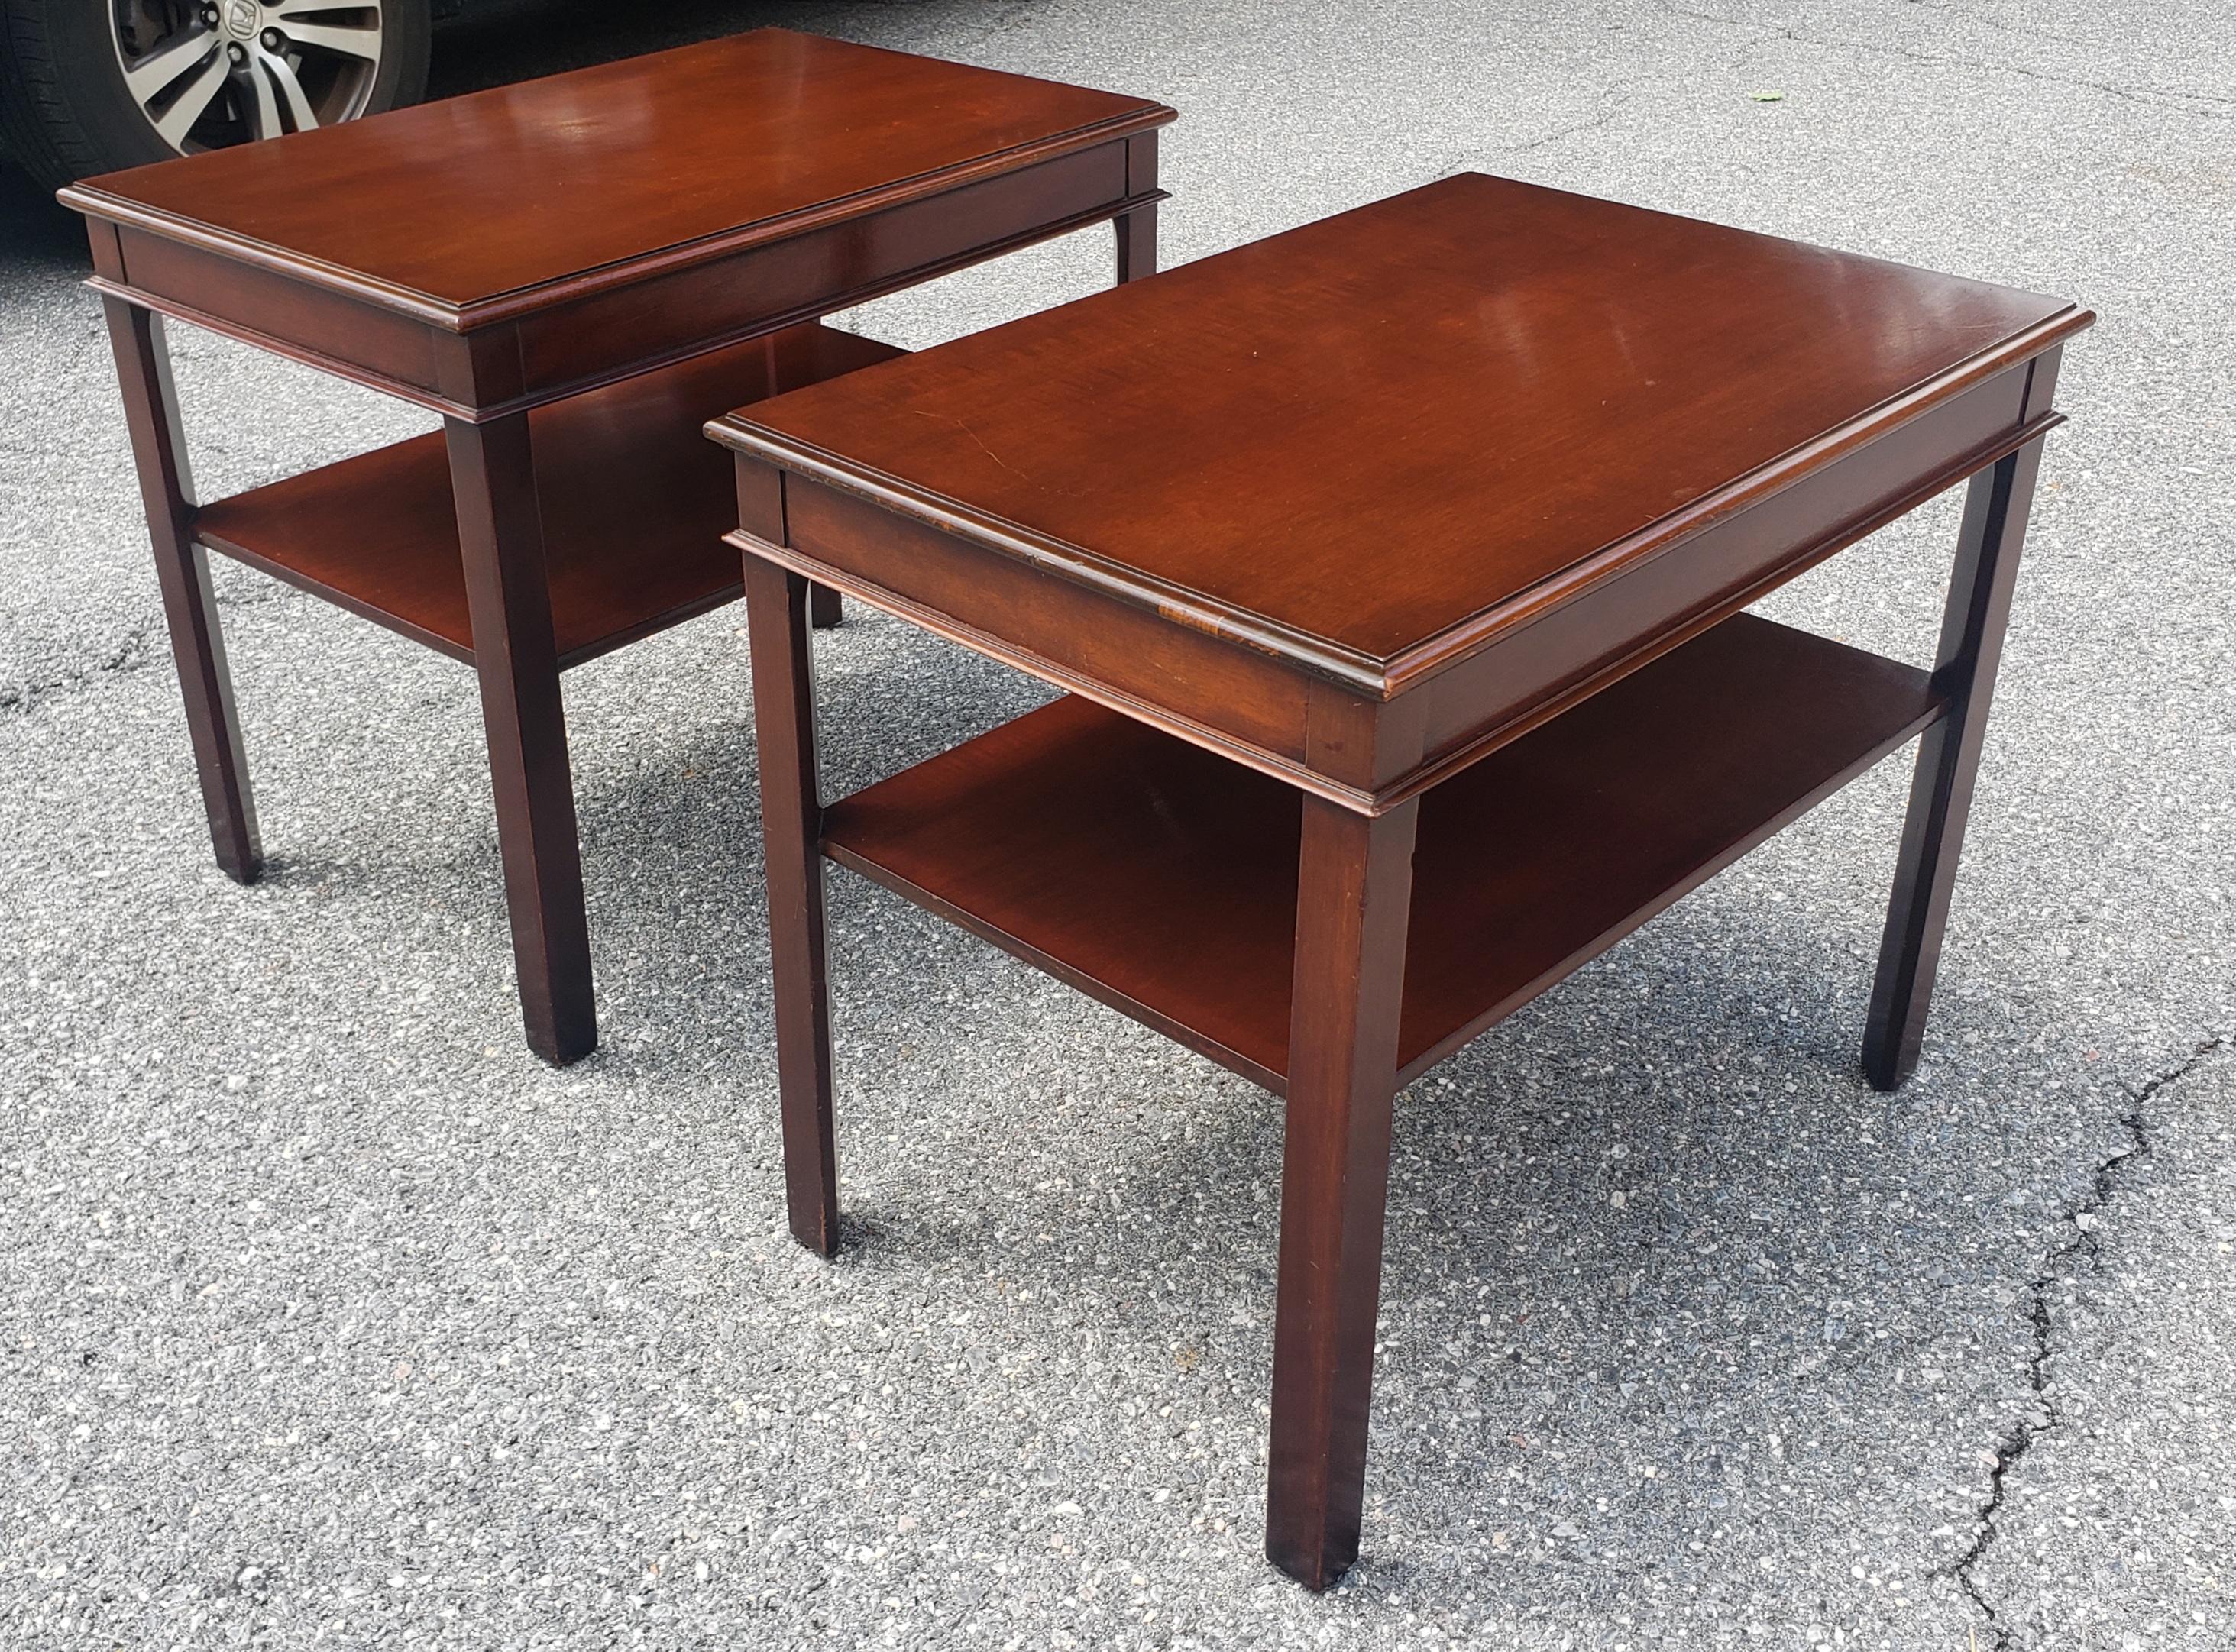 imperial mahogany side table